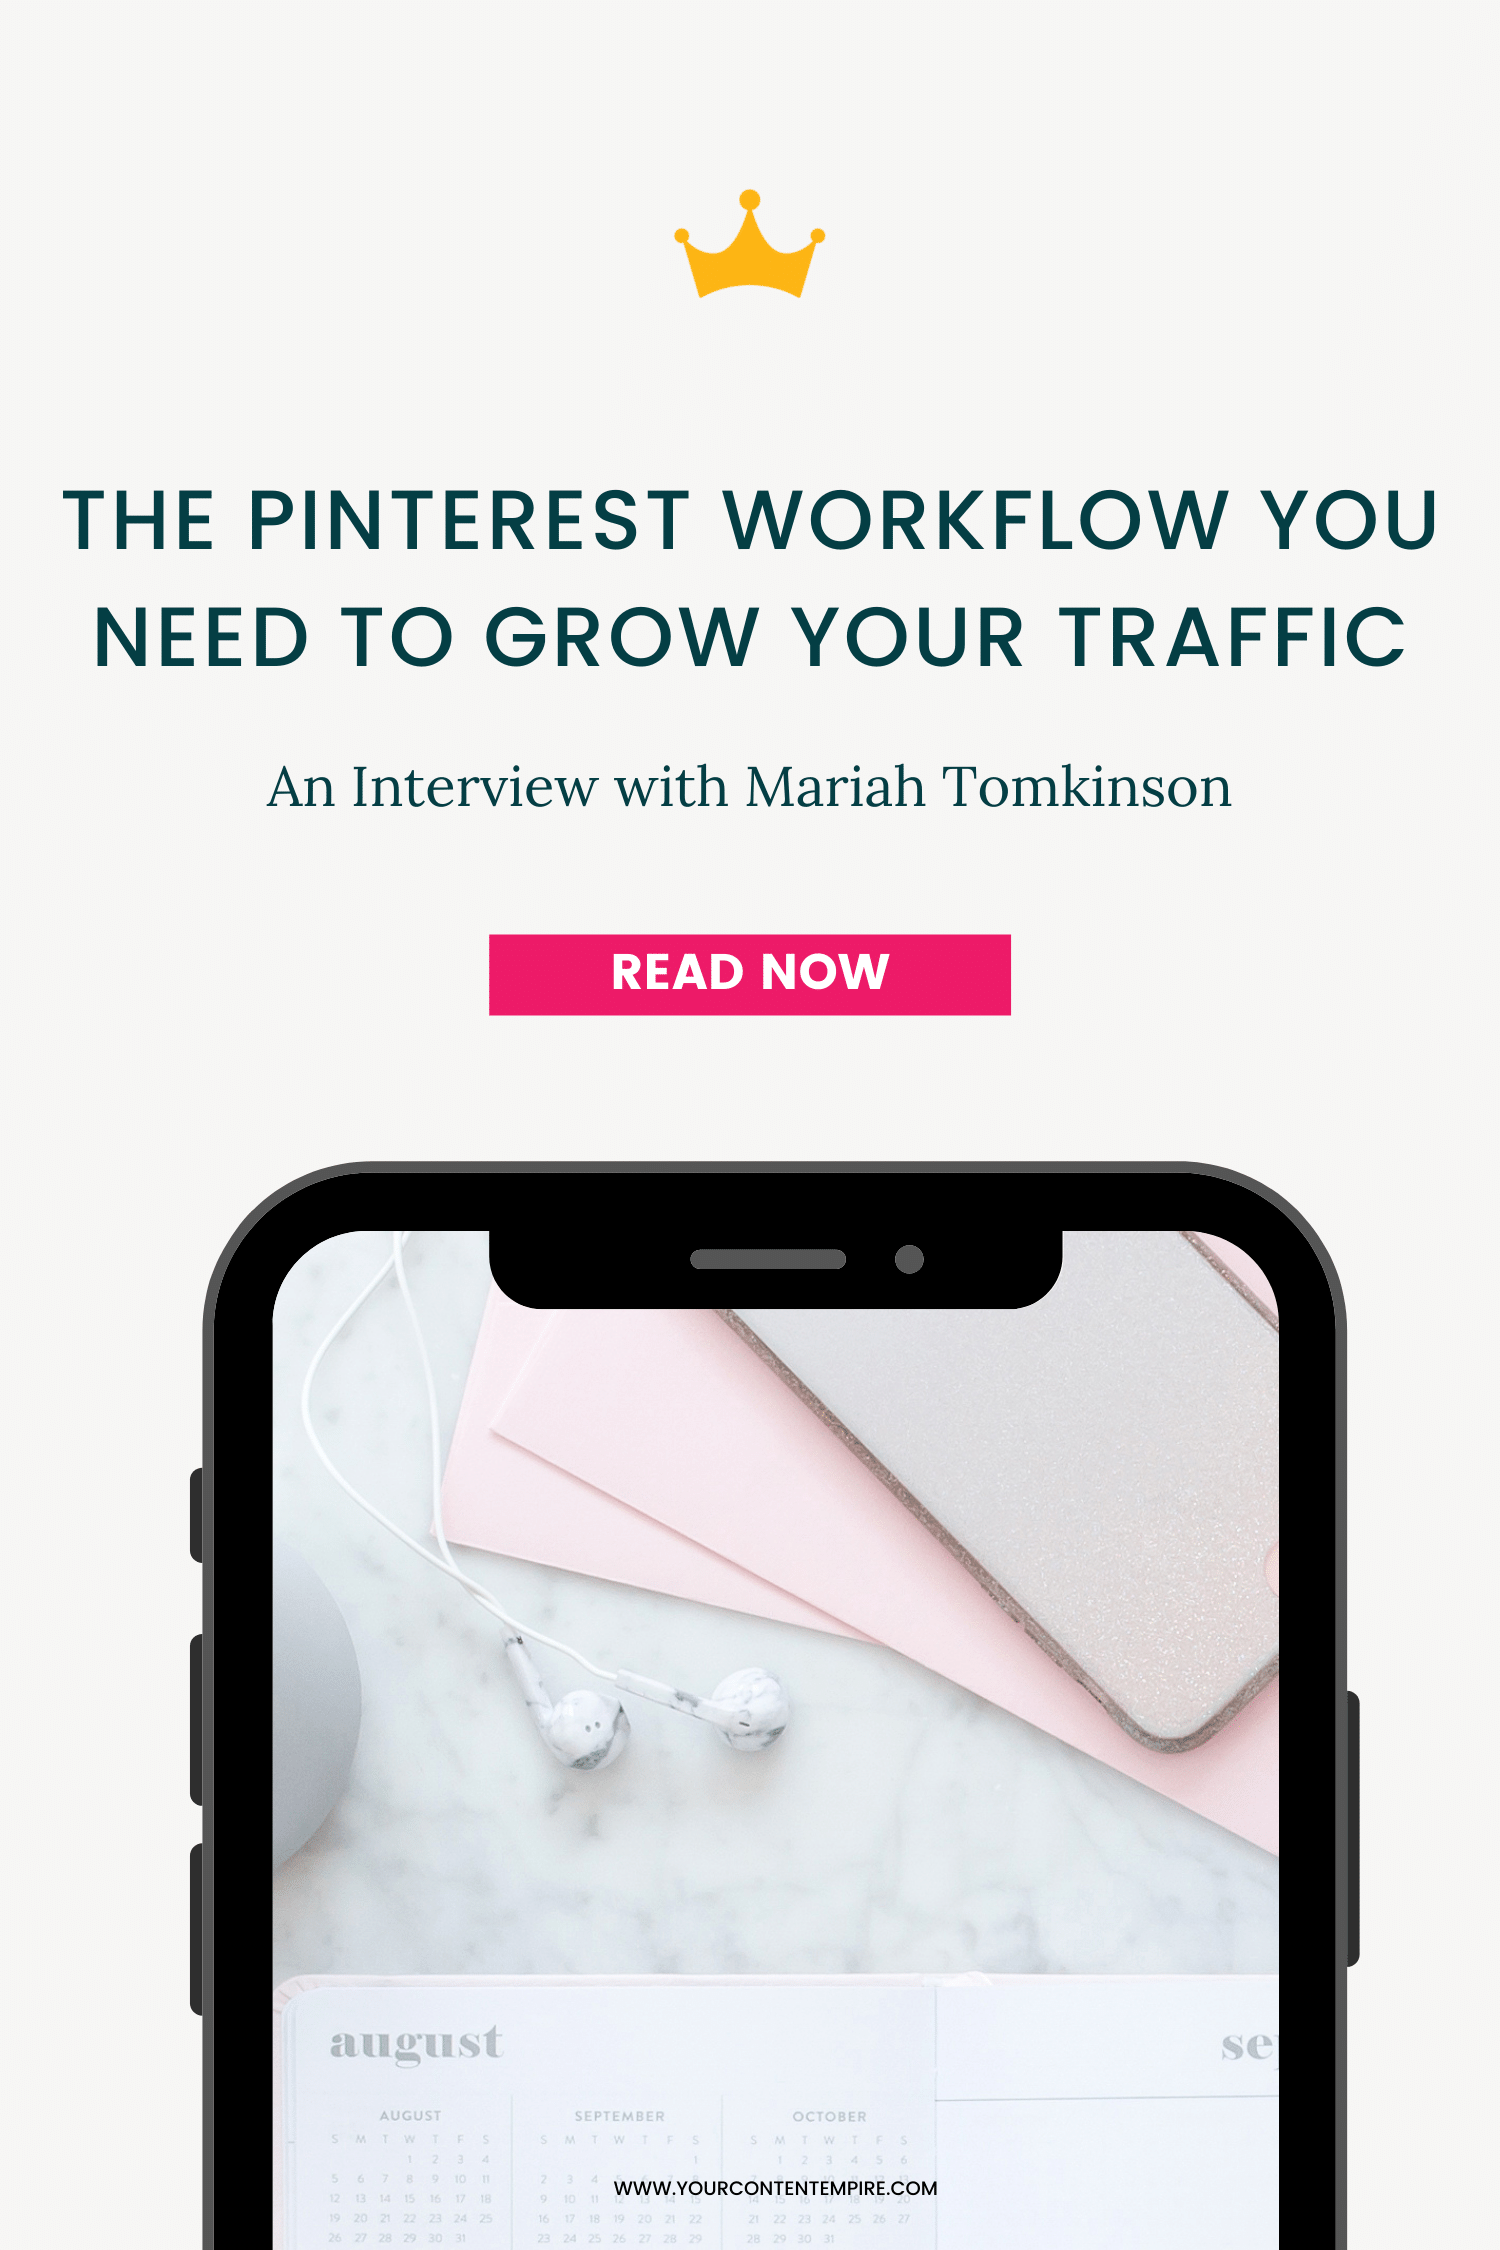 The Pinterest Workflow You Need to Grow Your Traffic